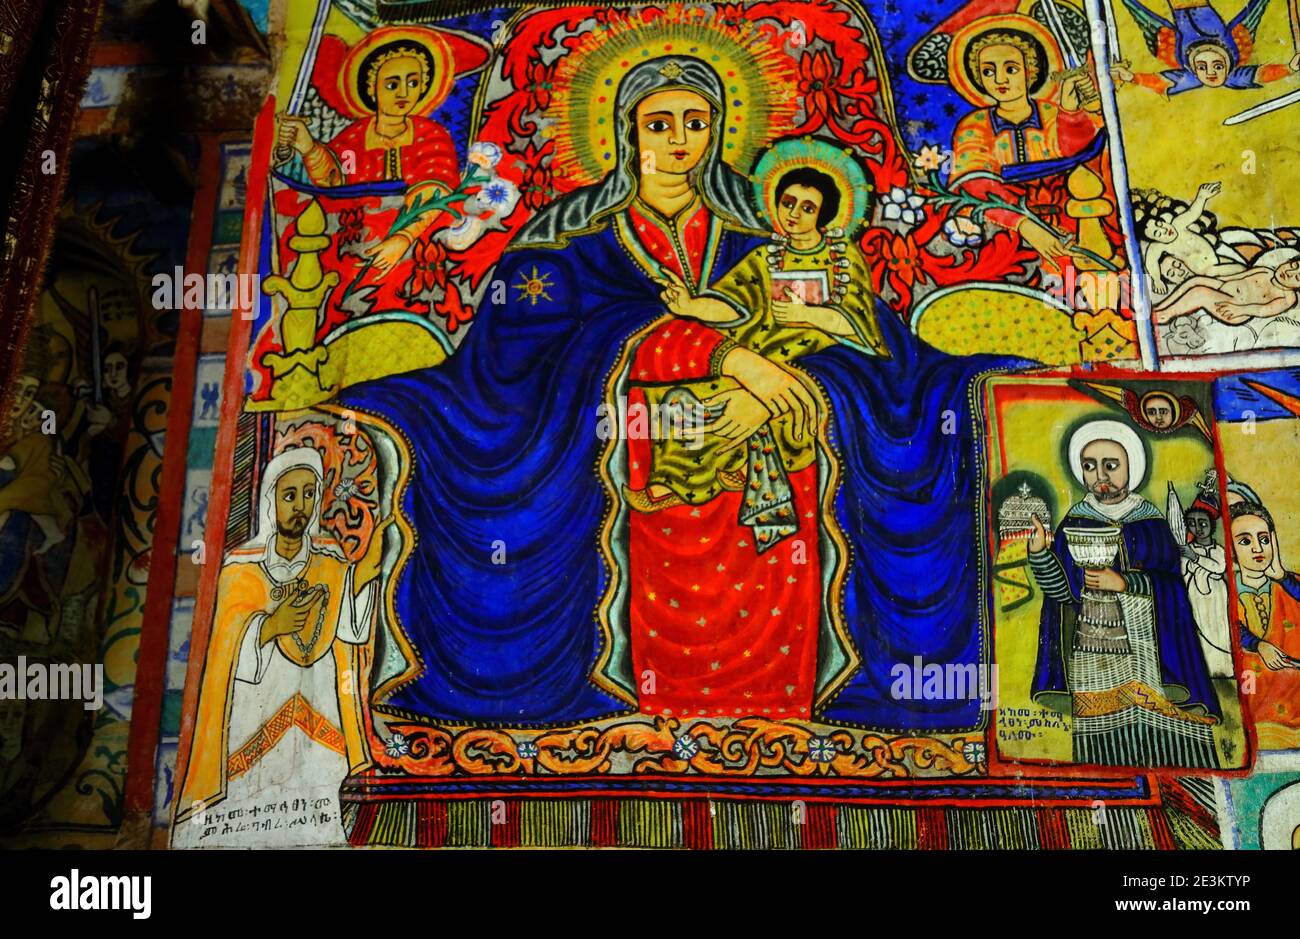 This painting in Azewa Mariam Monastery on Lake Tana, near Bahir Dar, Ethiopia, is perhaps most notable for its depiction of Jesus as having African h Stock Photo